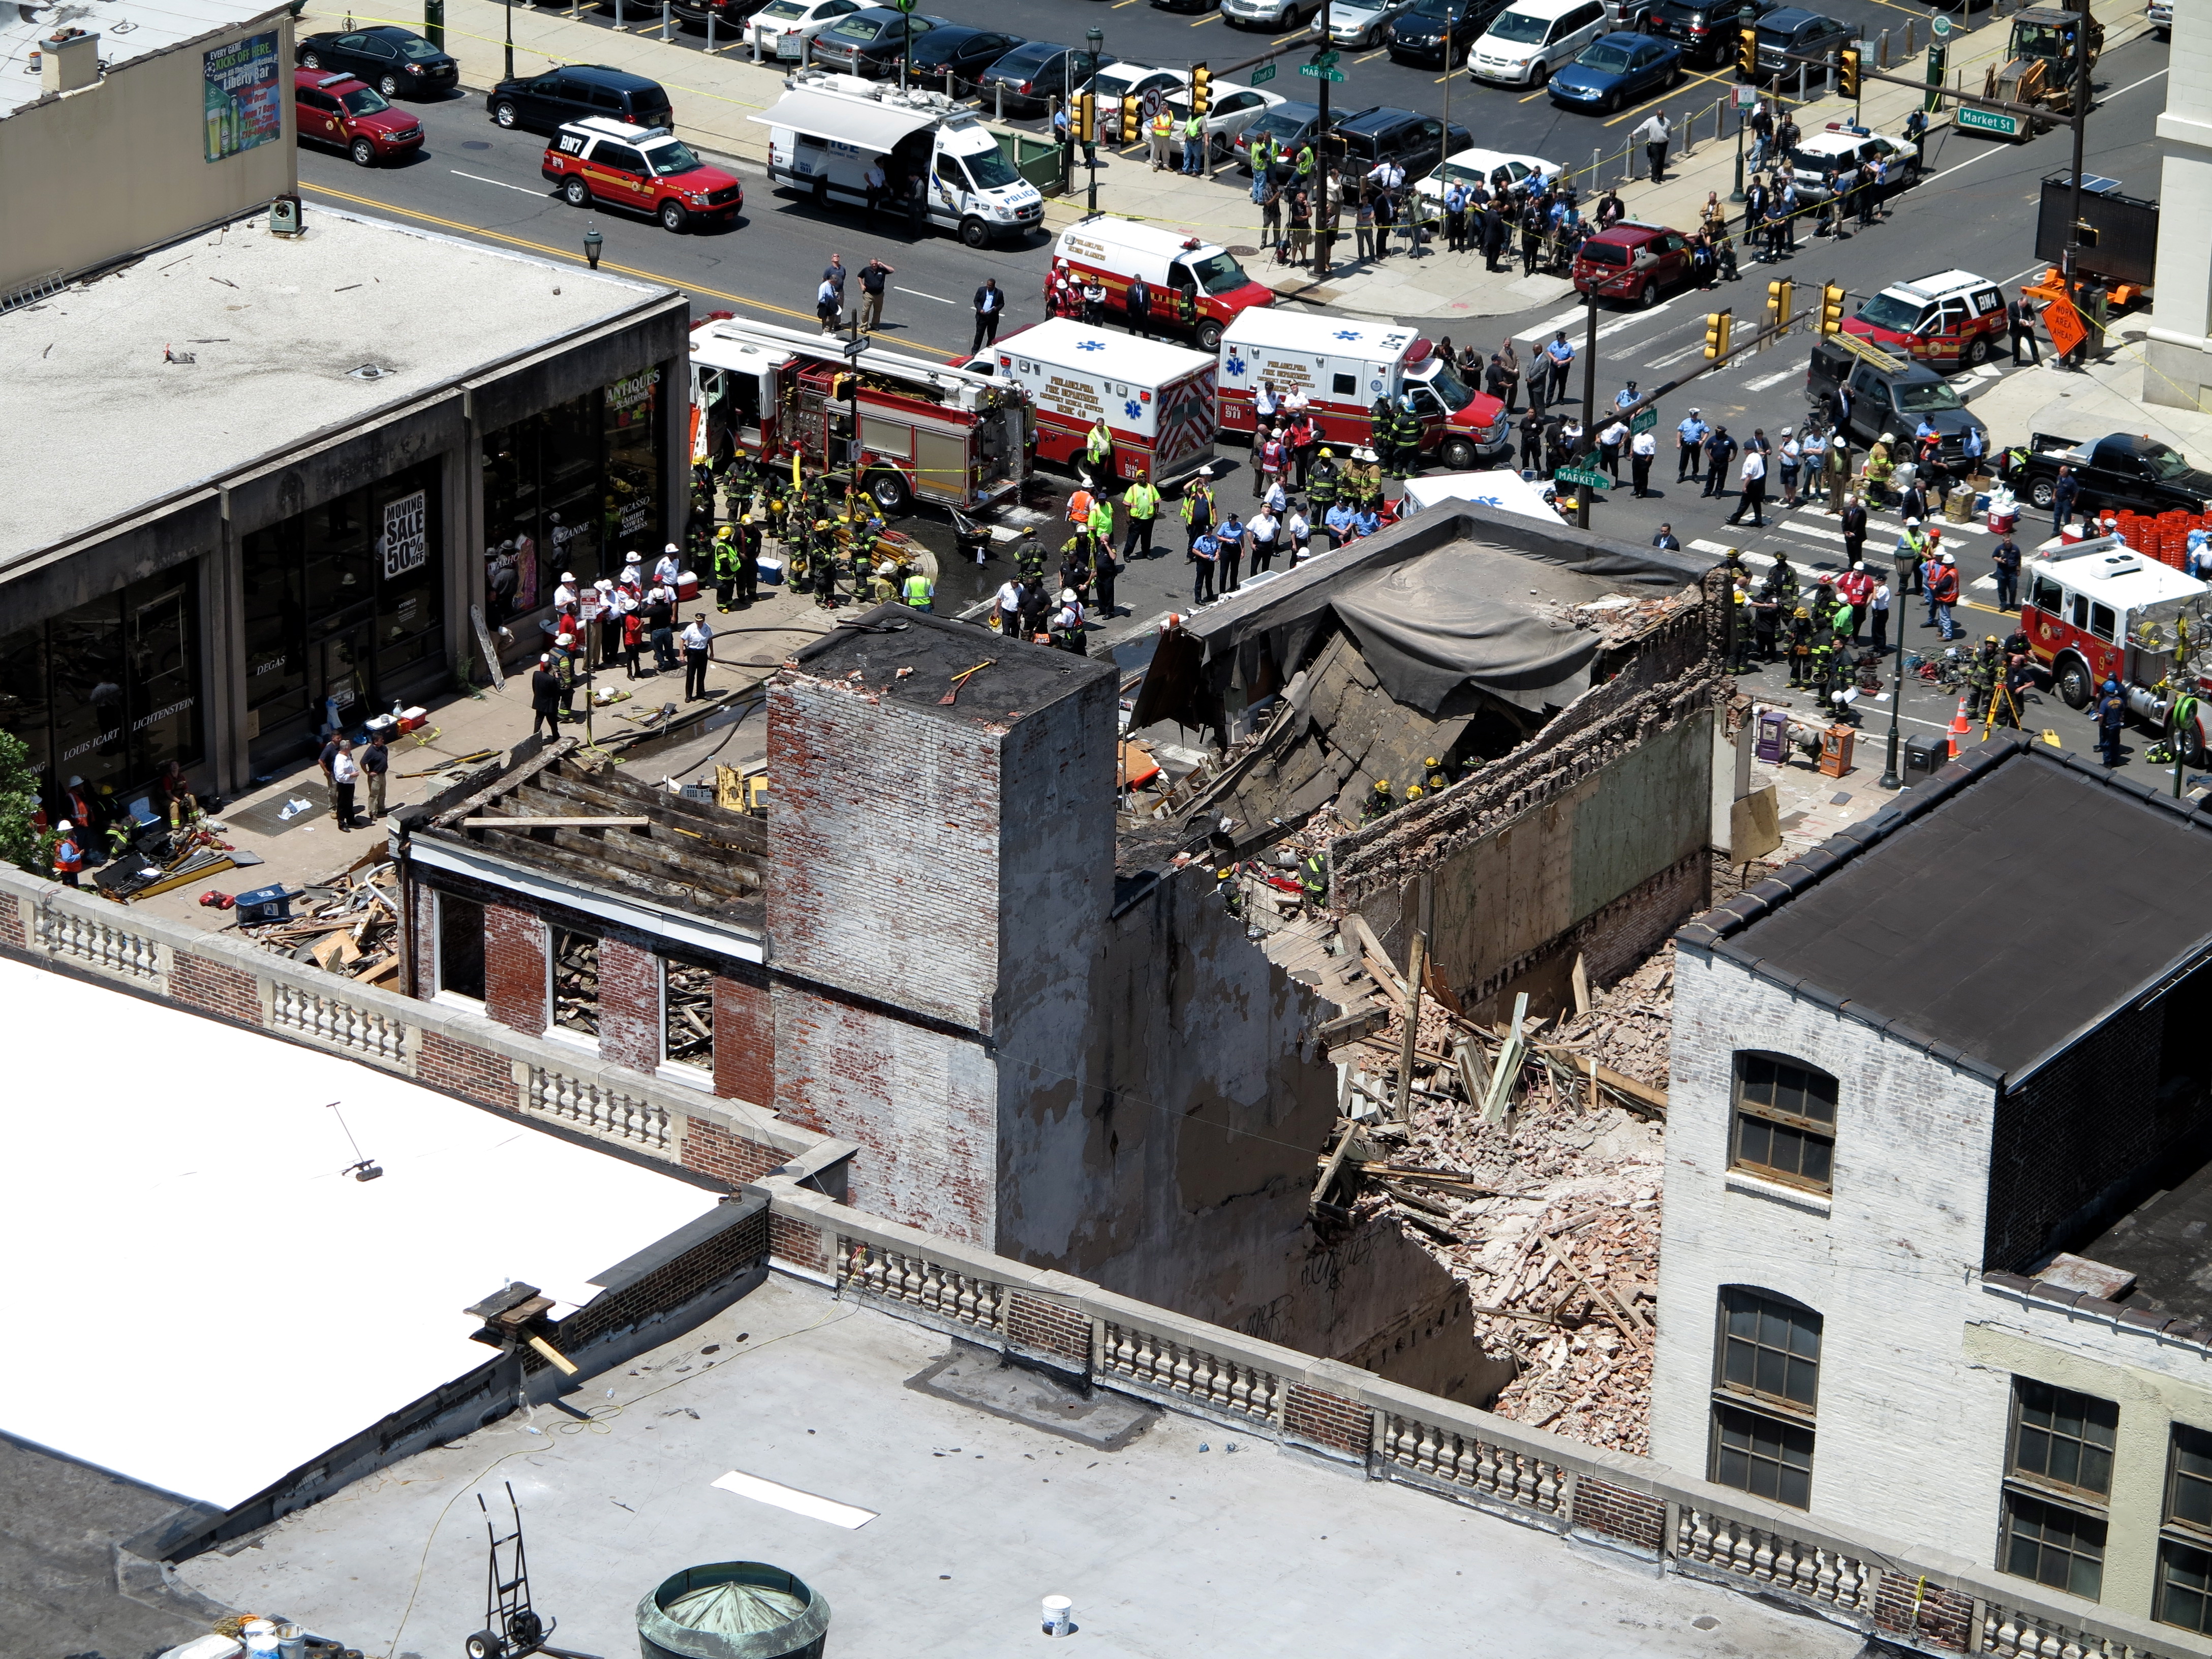 The collapse site from above, from the RiverWest Condominium's rooftop.